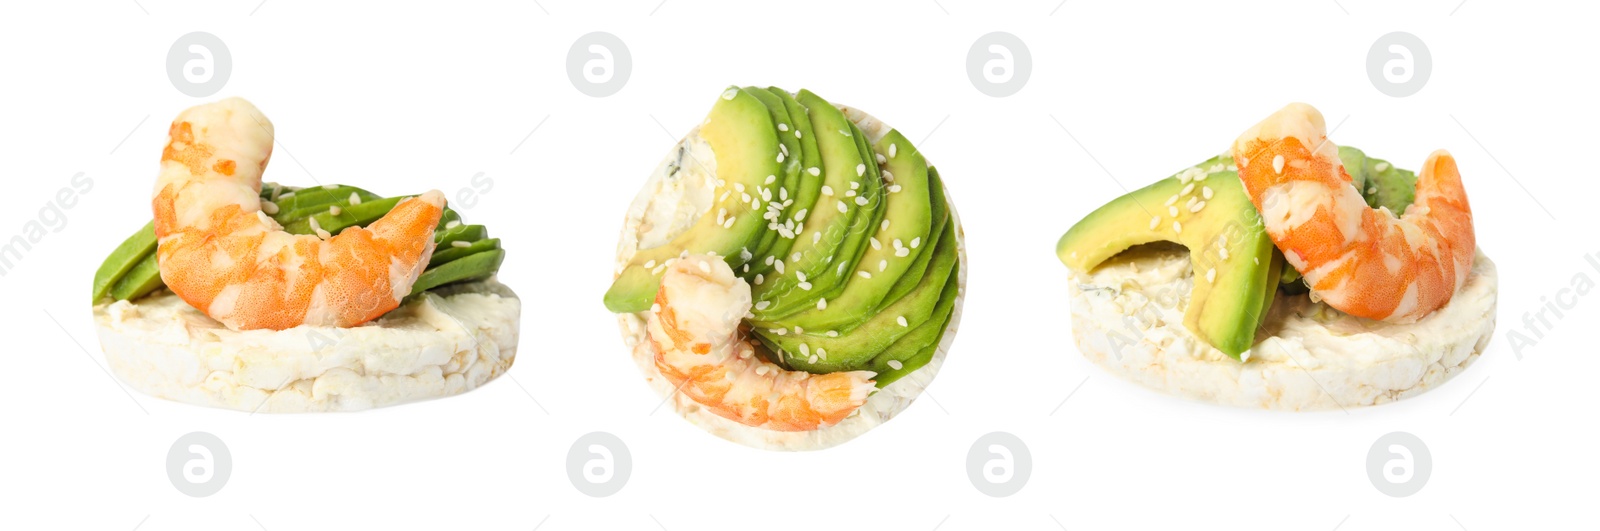 Image of Puffed corn cake with avocado and shrimp on white background, view from different sides. Banner design